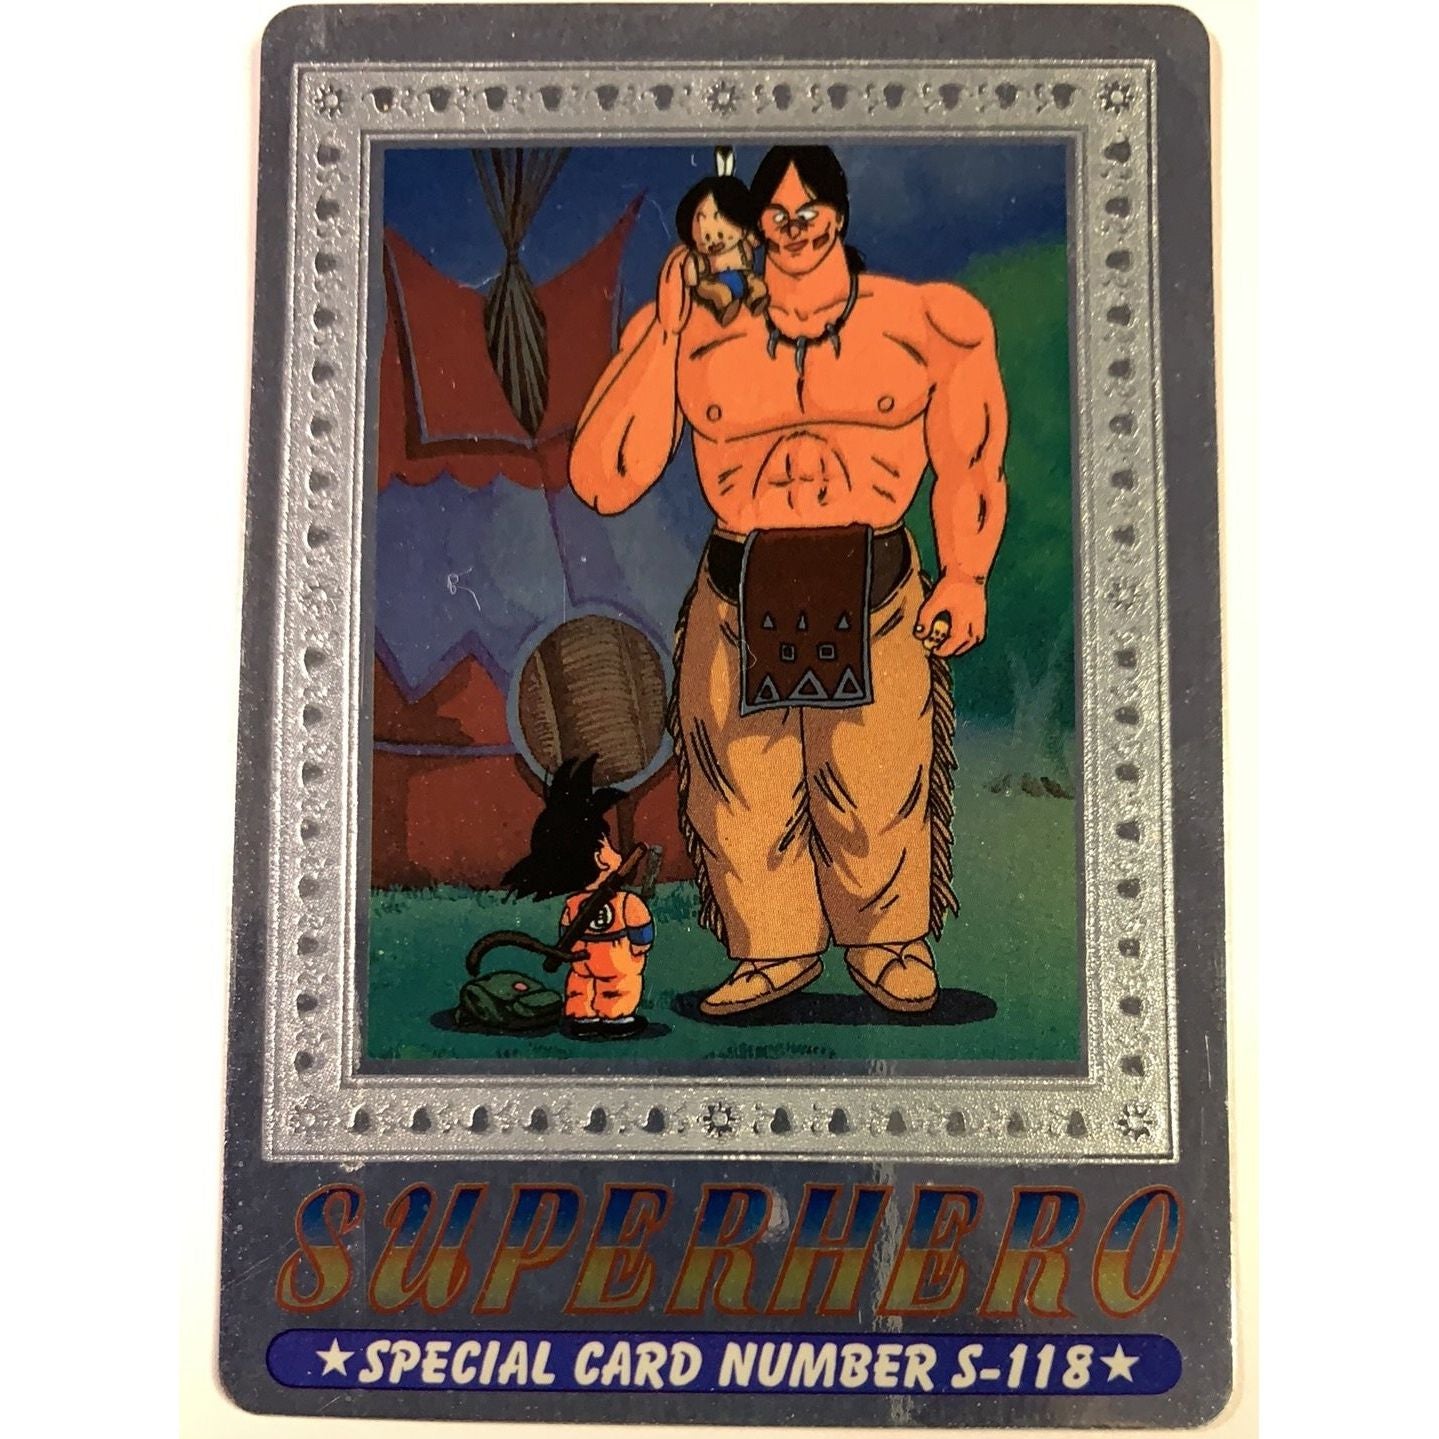  1995 Cardass Adali Super Hero Special Card S-118 Silver Foil  Local Legends Cards & Collectibles